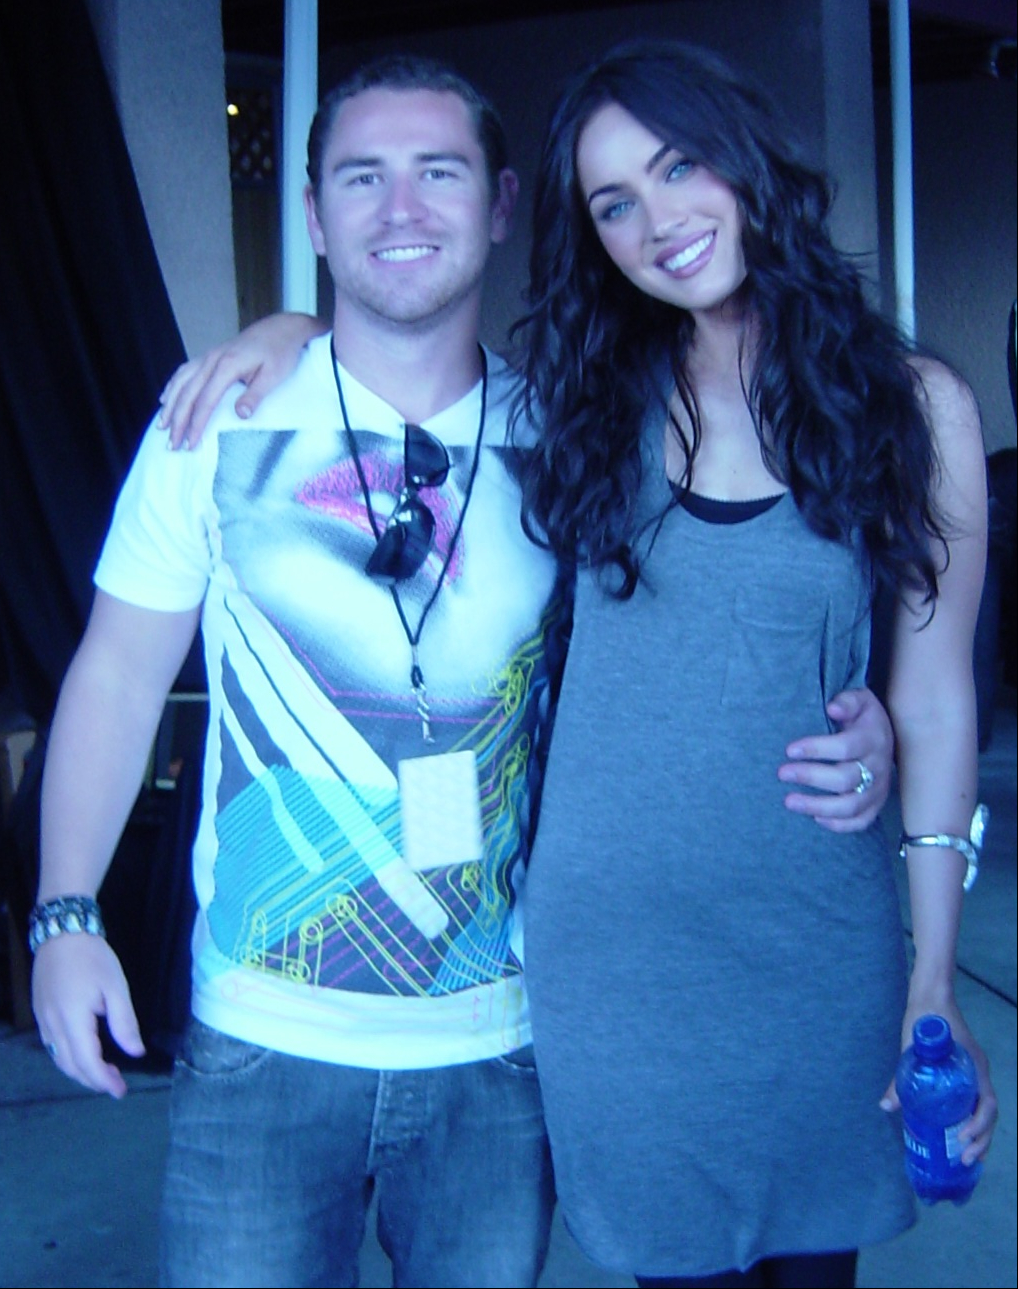 Teen Choice Awards 20007-Pictured With Megan Fox